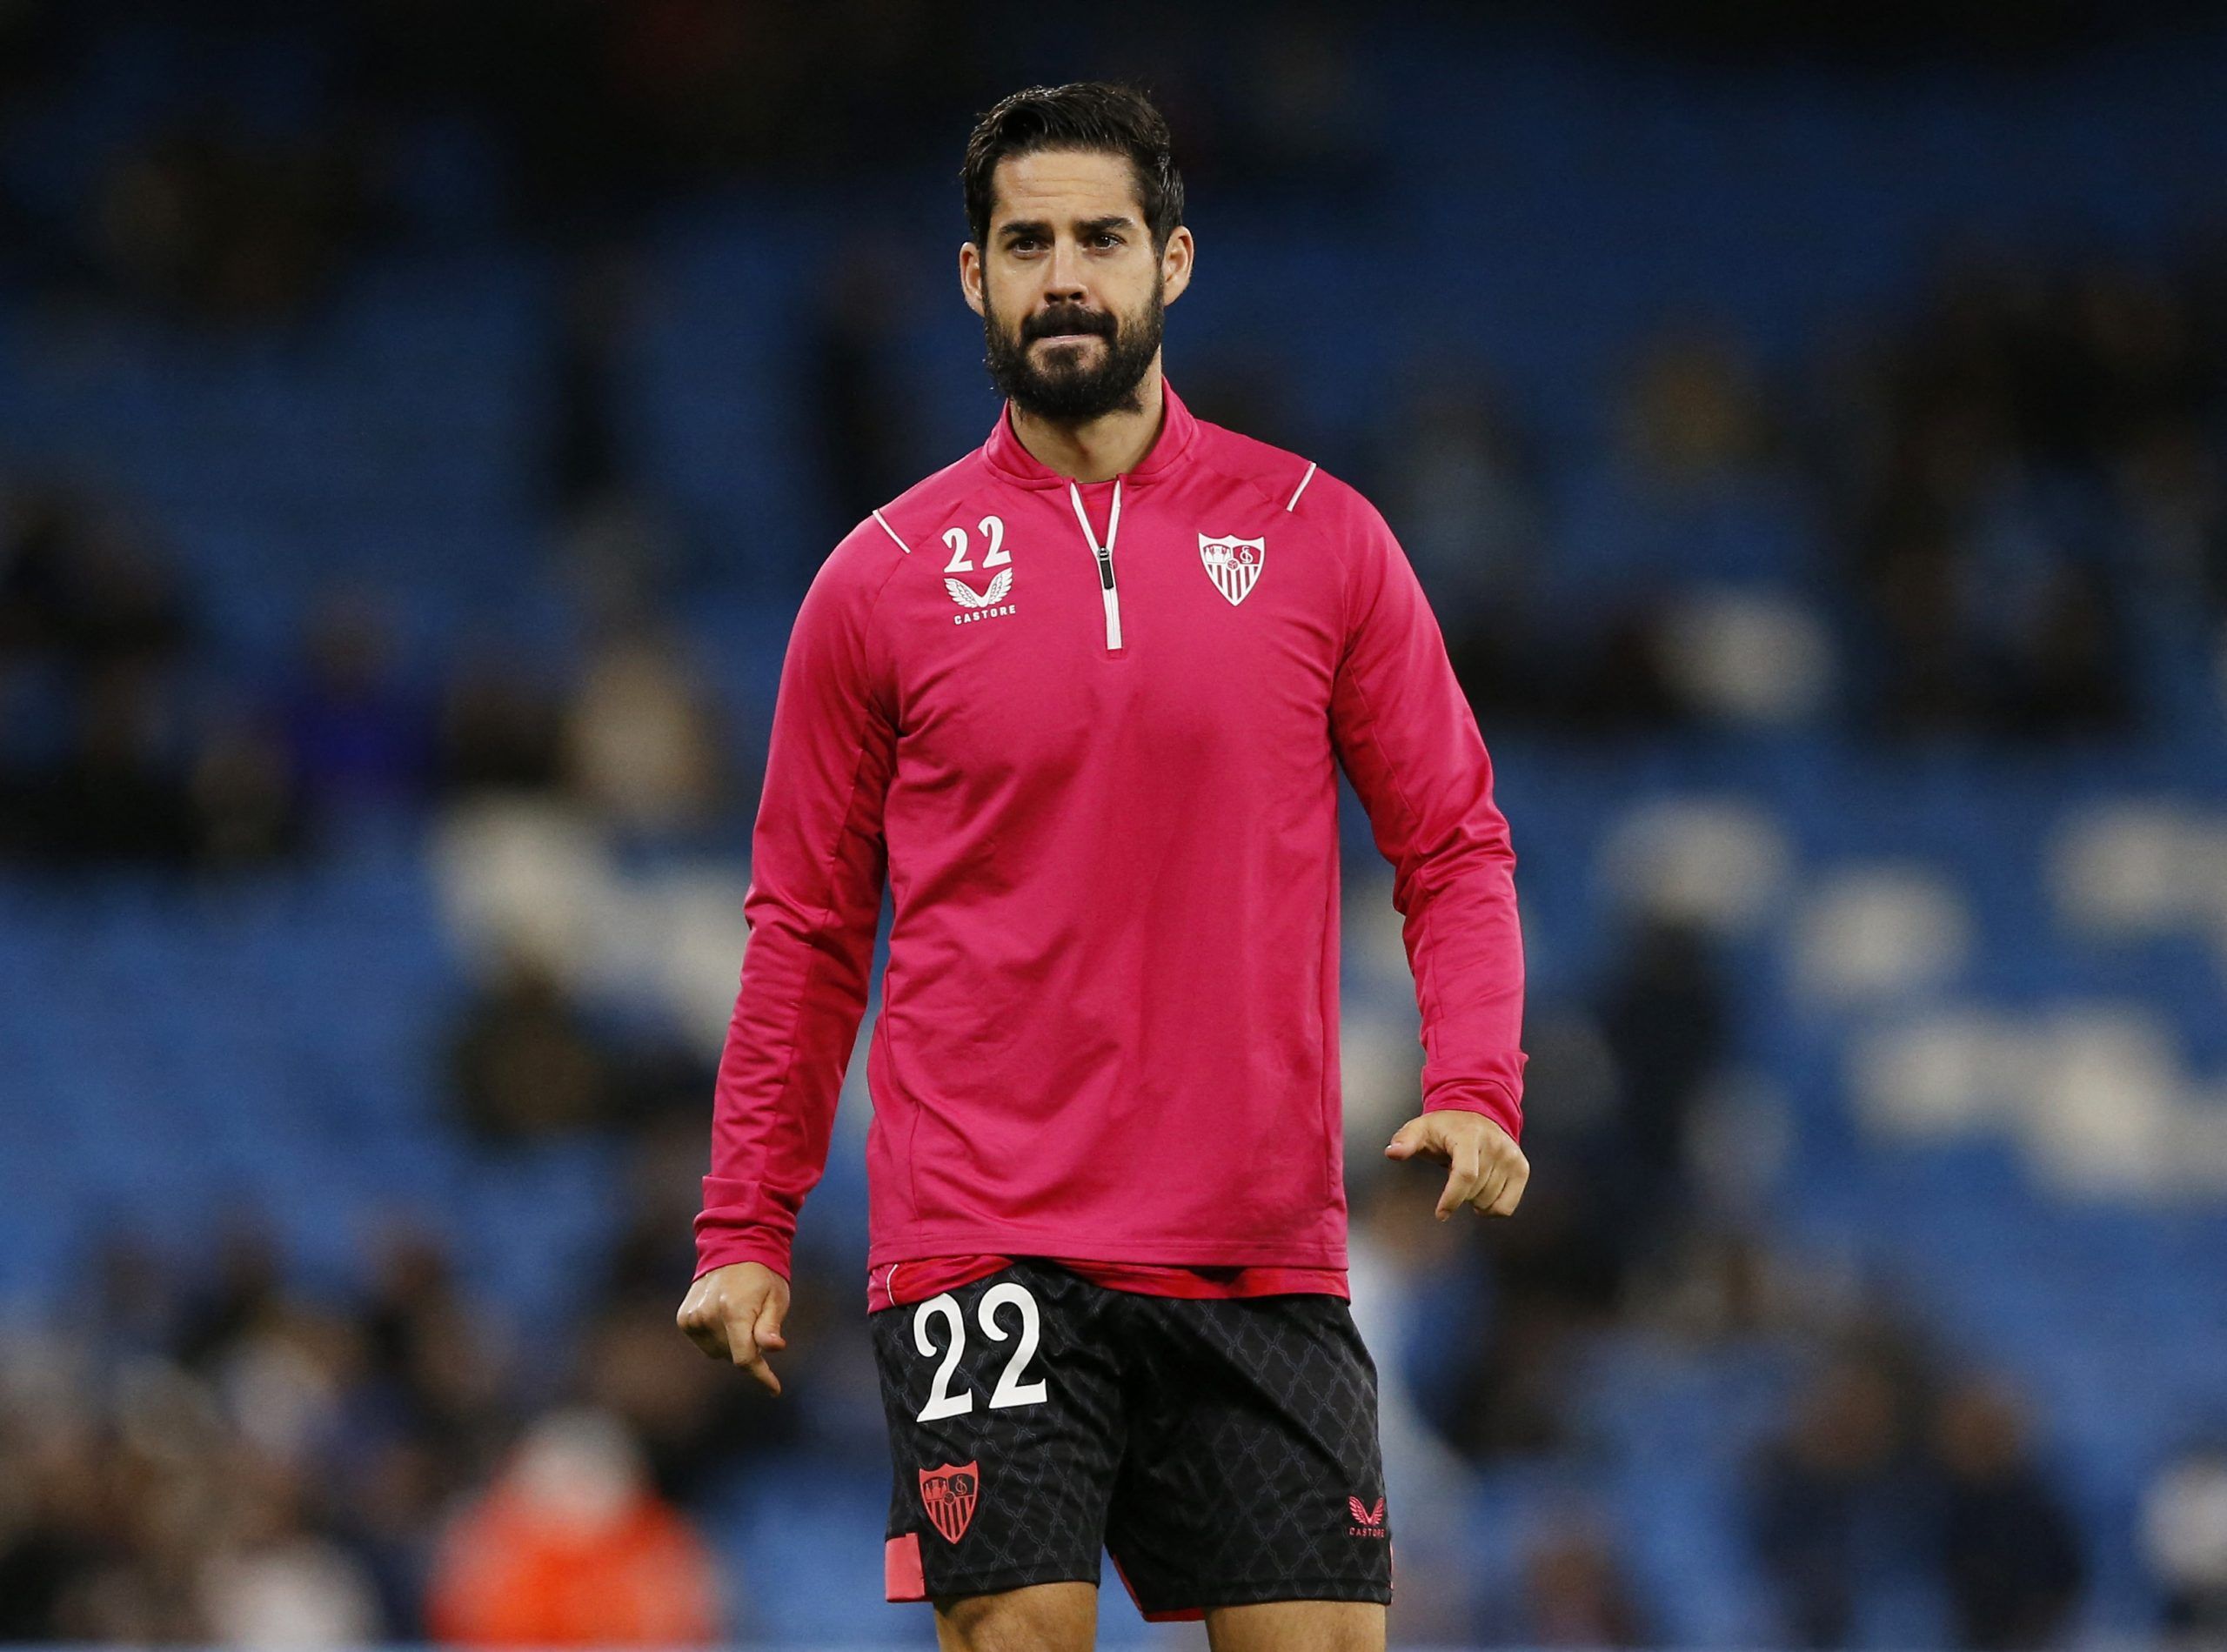 Soccer Football - Champions League - Group G - Manchester City v Sevilla - Etihad Stadium, Manchester, Britain - November 2, 2022 Sevilla's Isco during the warm up before the match REUTERS/Craig Brough